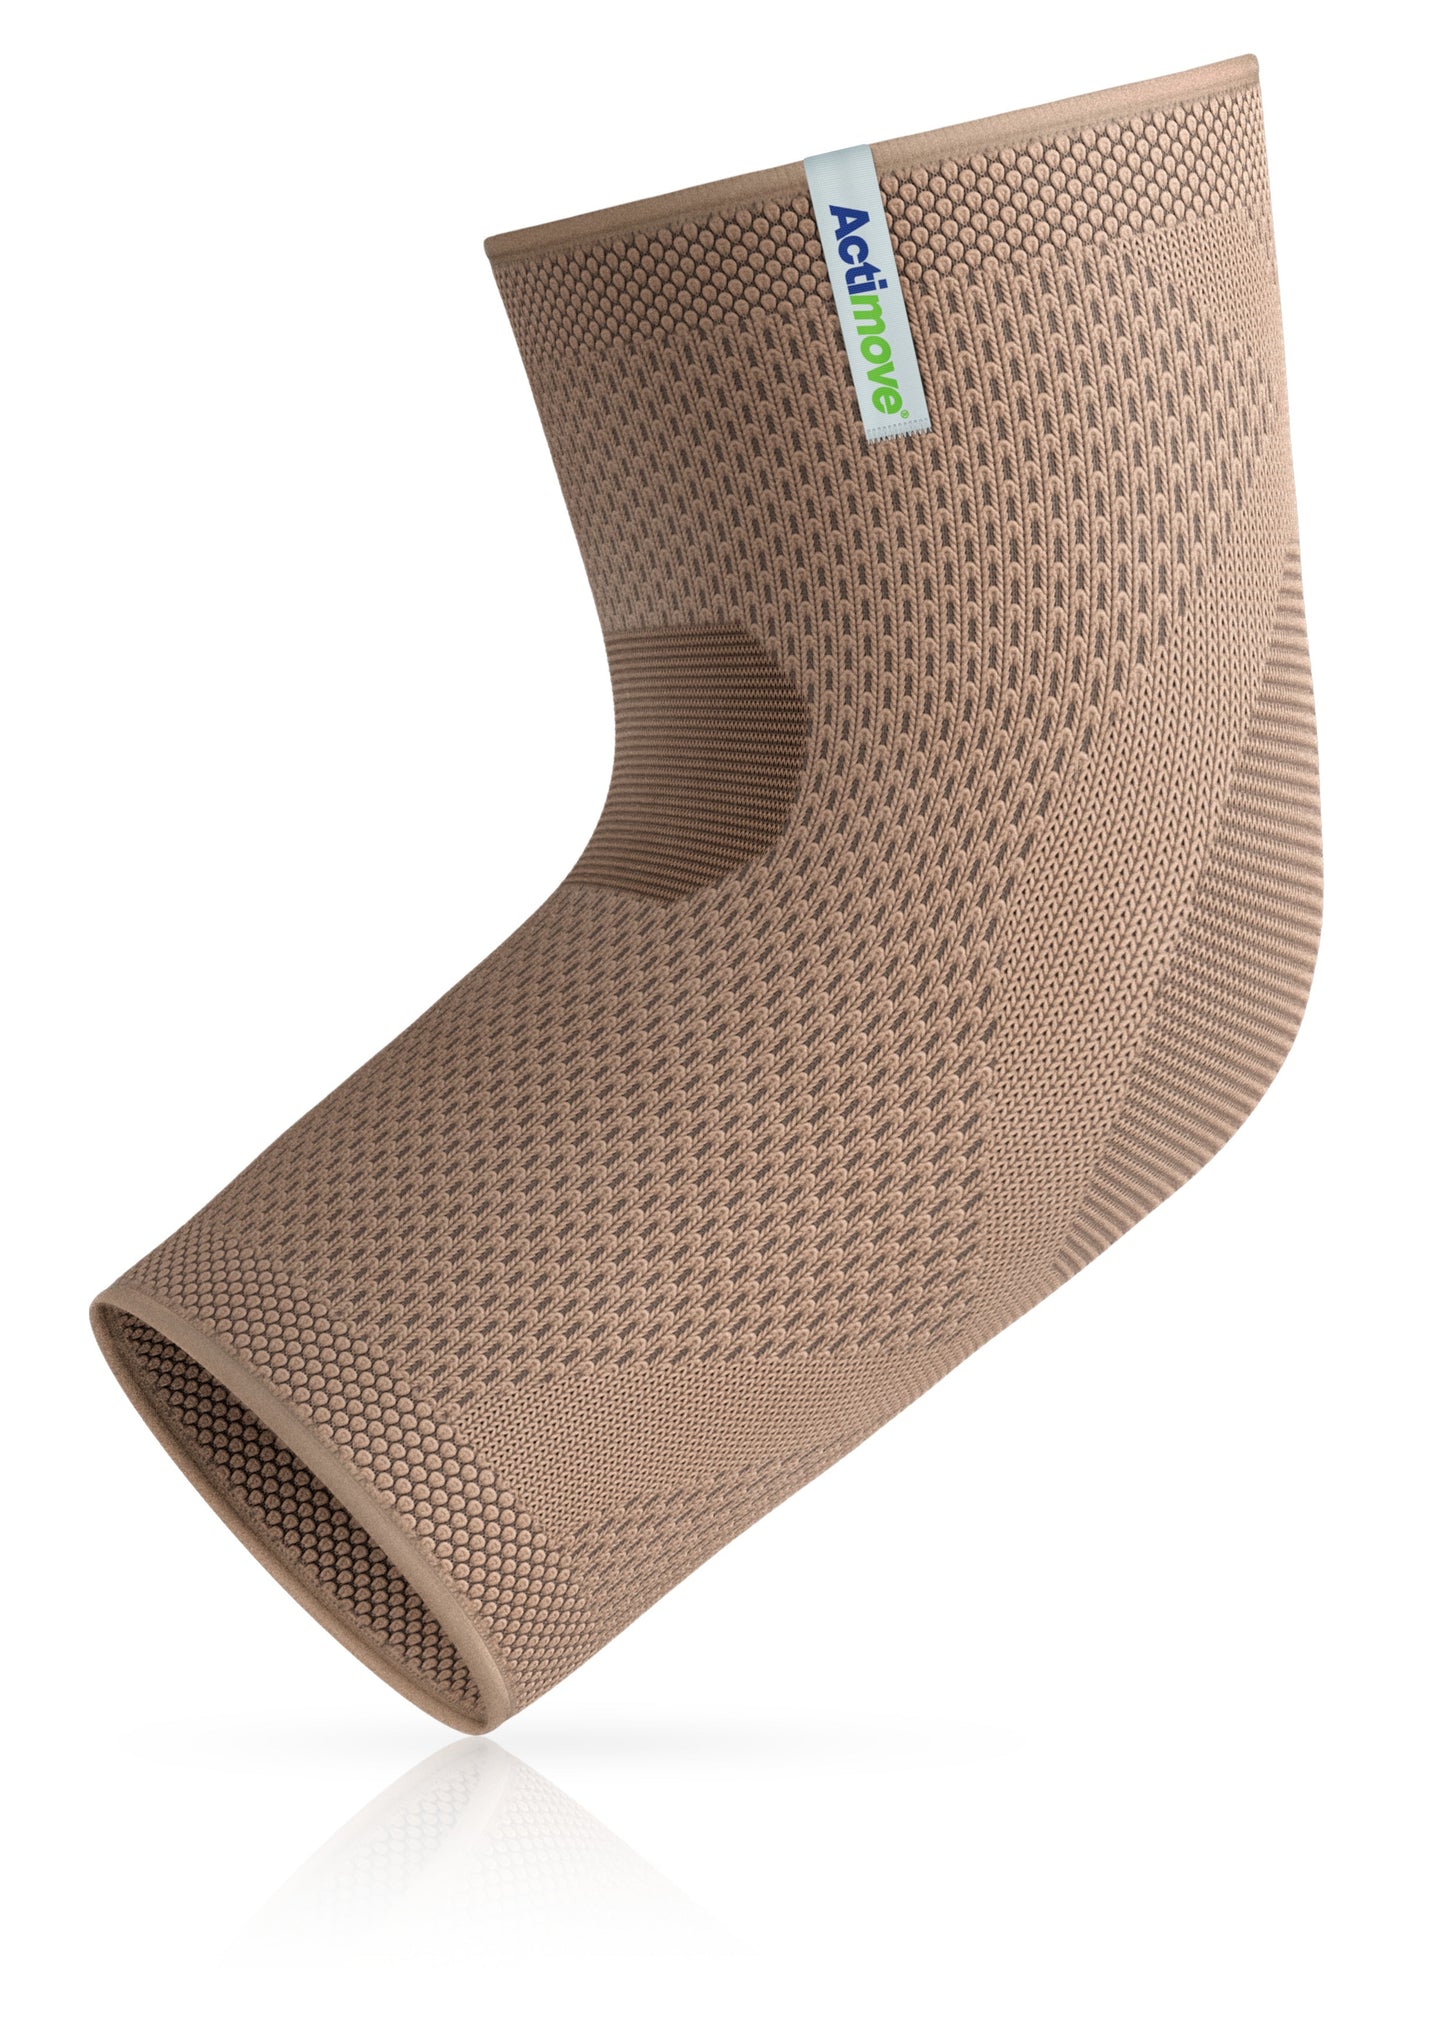 Jobst Actimove Everyday Supports Elbow Support